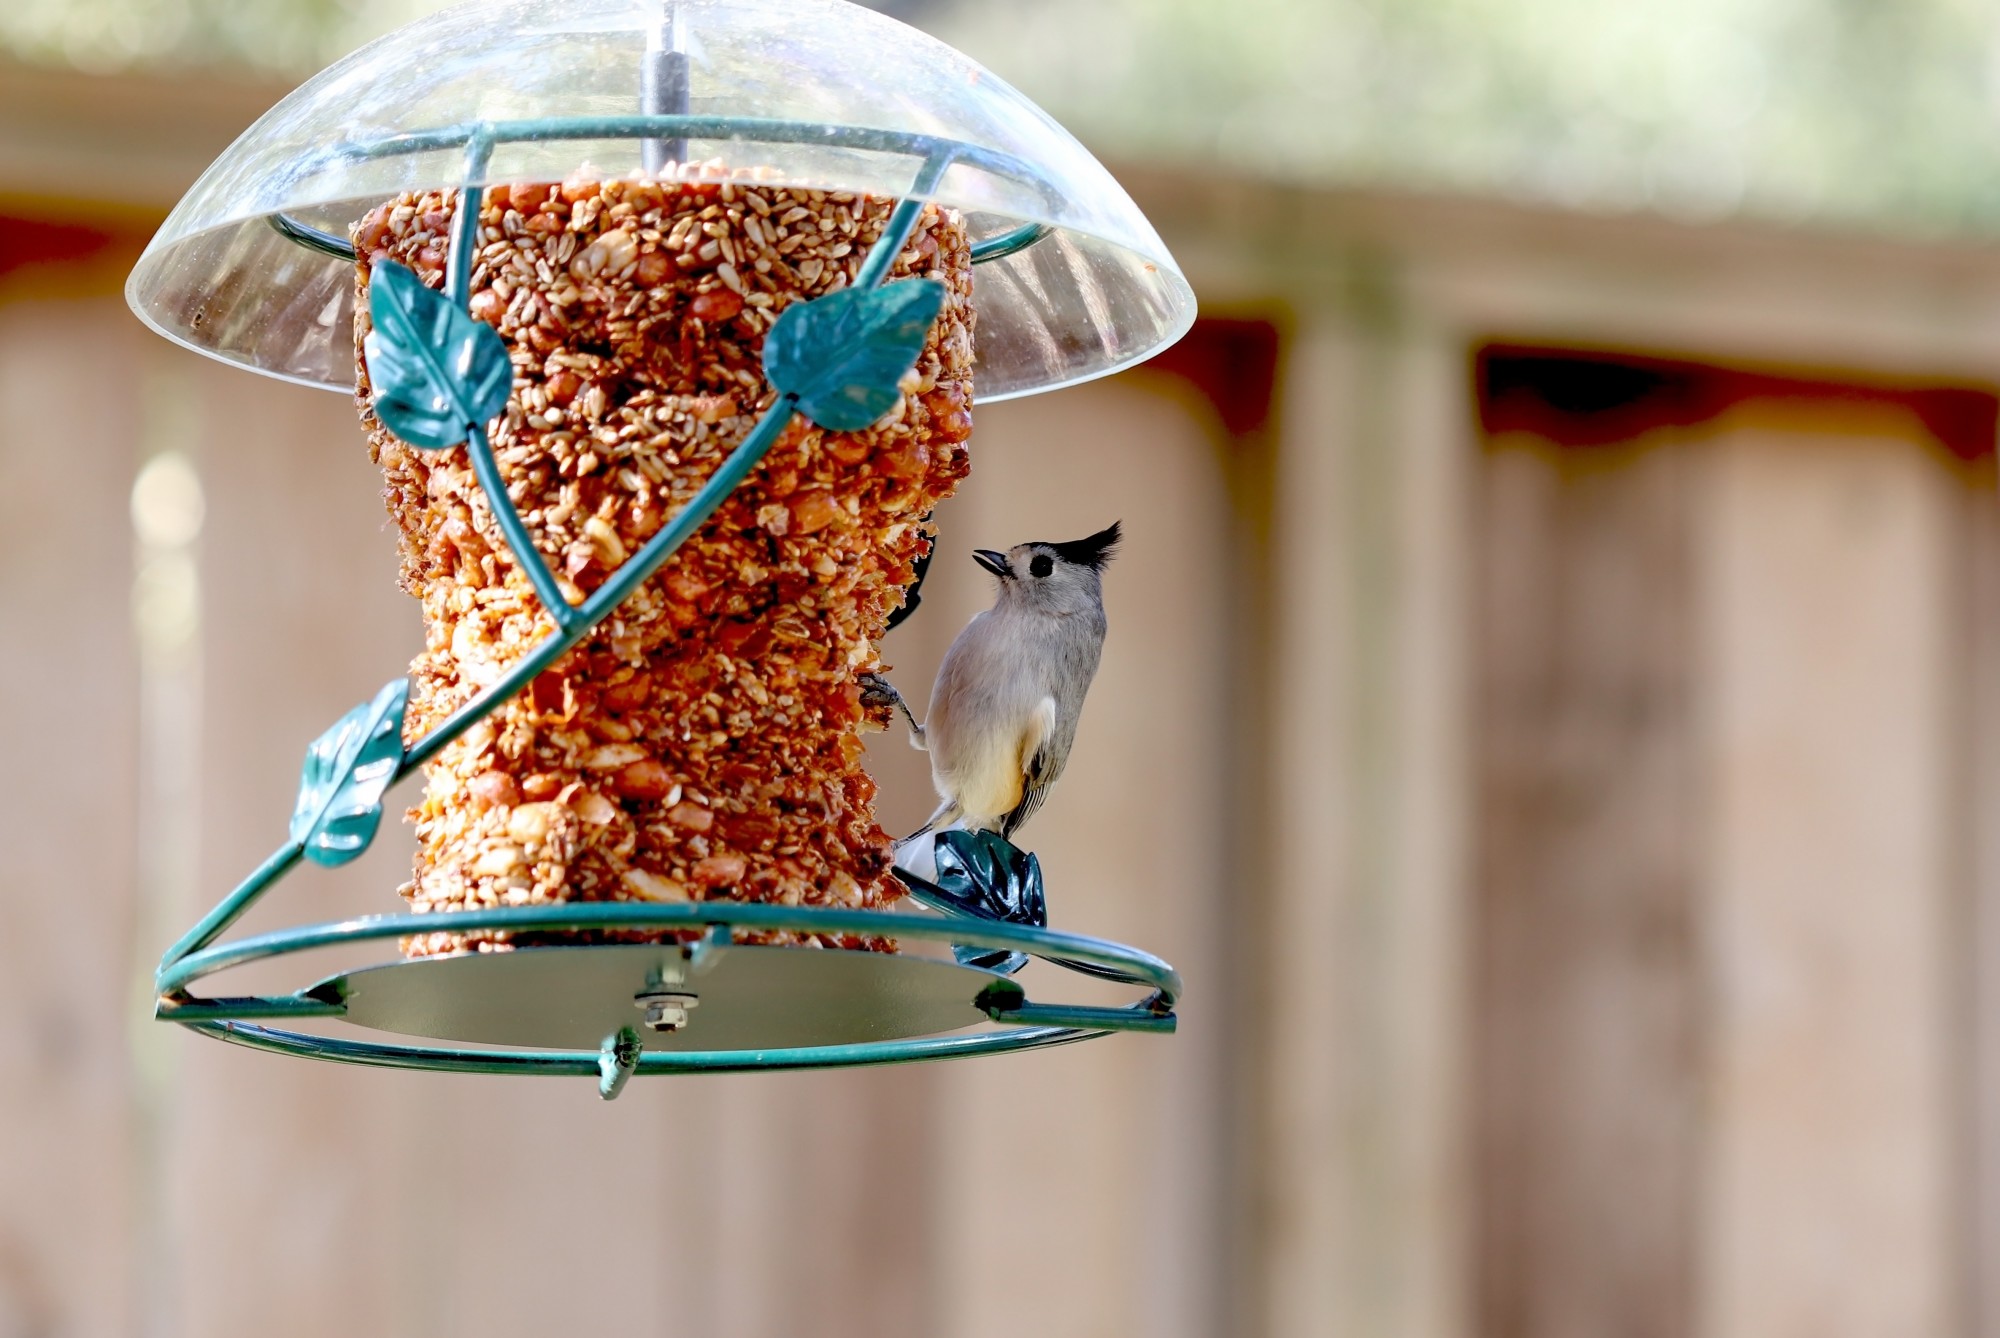 Why Won't Birds Come to My Feeder?: 5 Common Mistakes You May Be Making